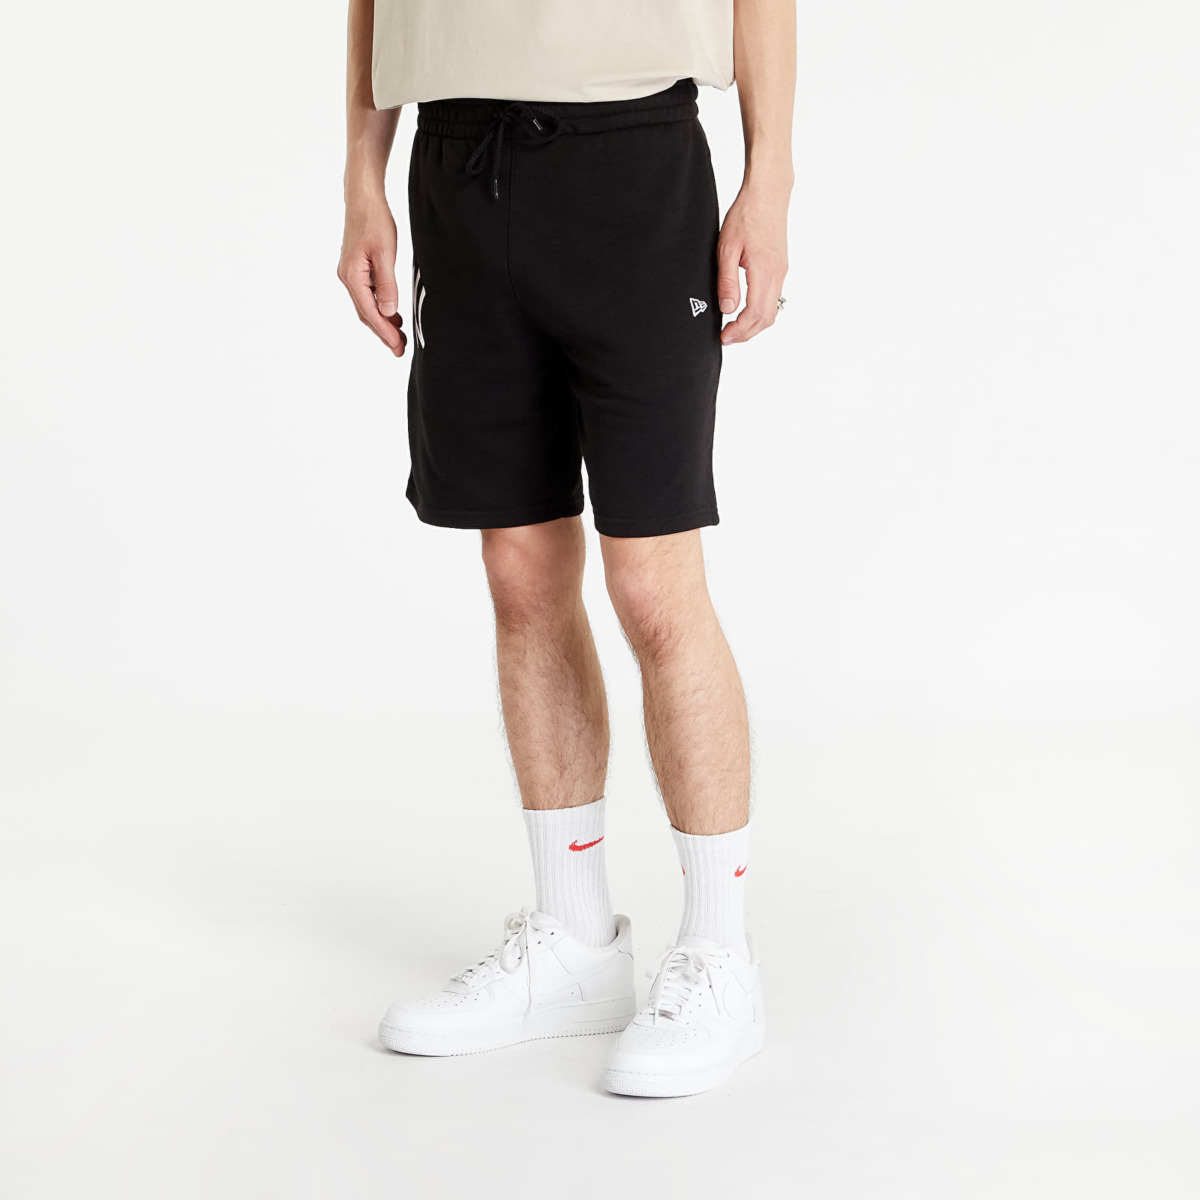 Footshop Mens Shorts in White from New Era GOOFASH